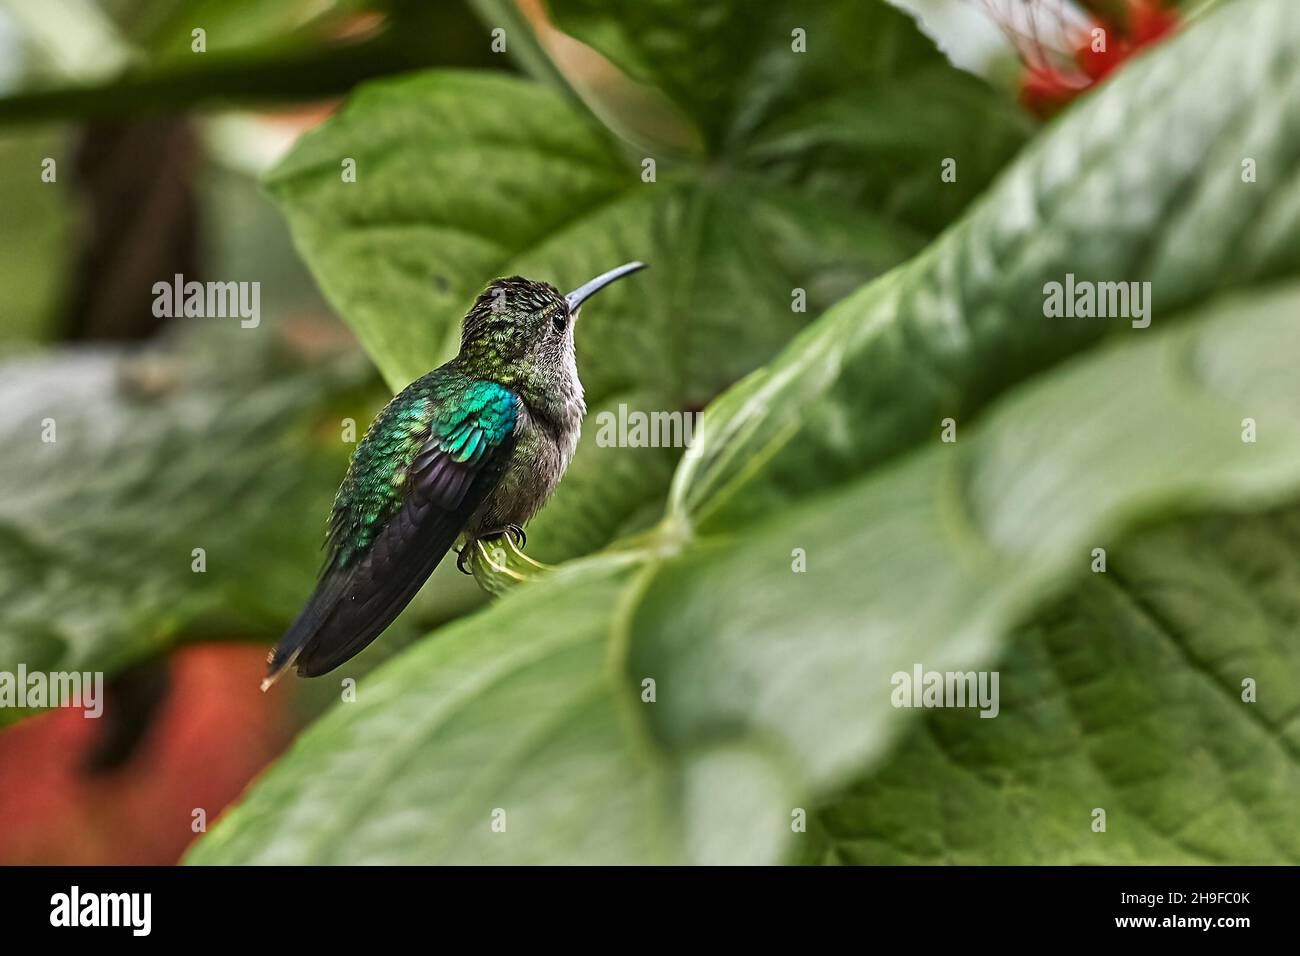 Colibri feeding from flower in a rainforest Stock Photo